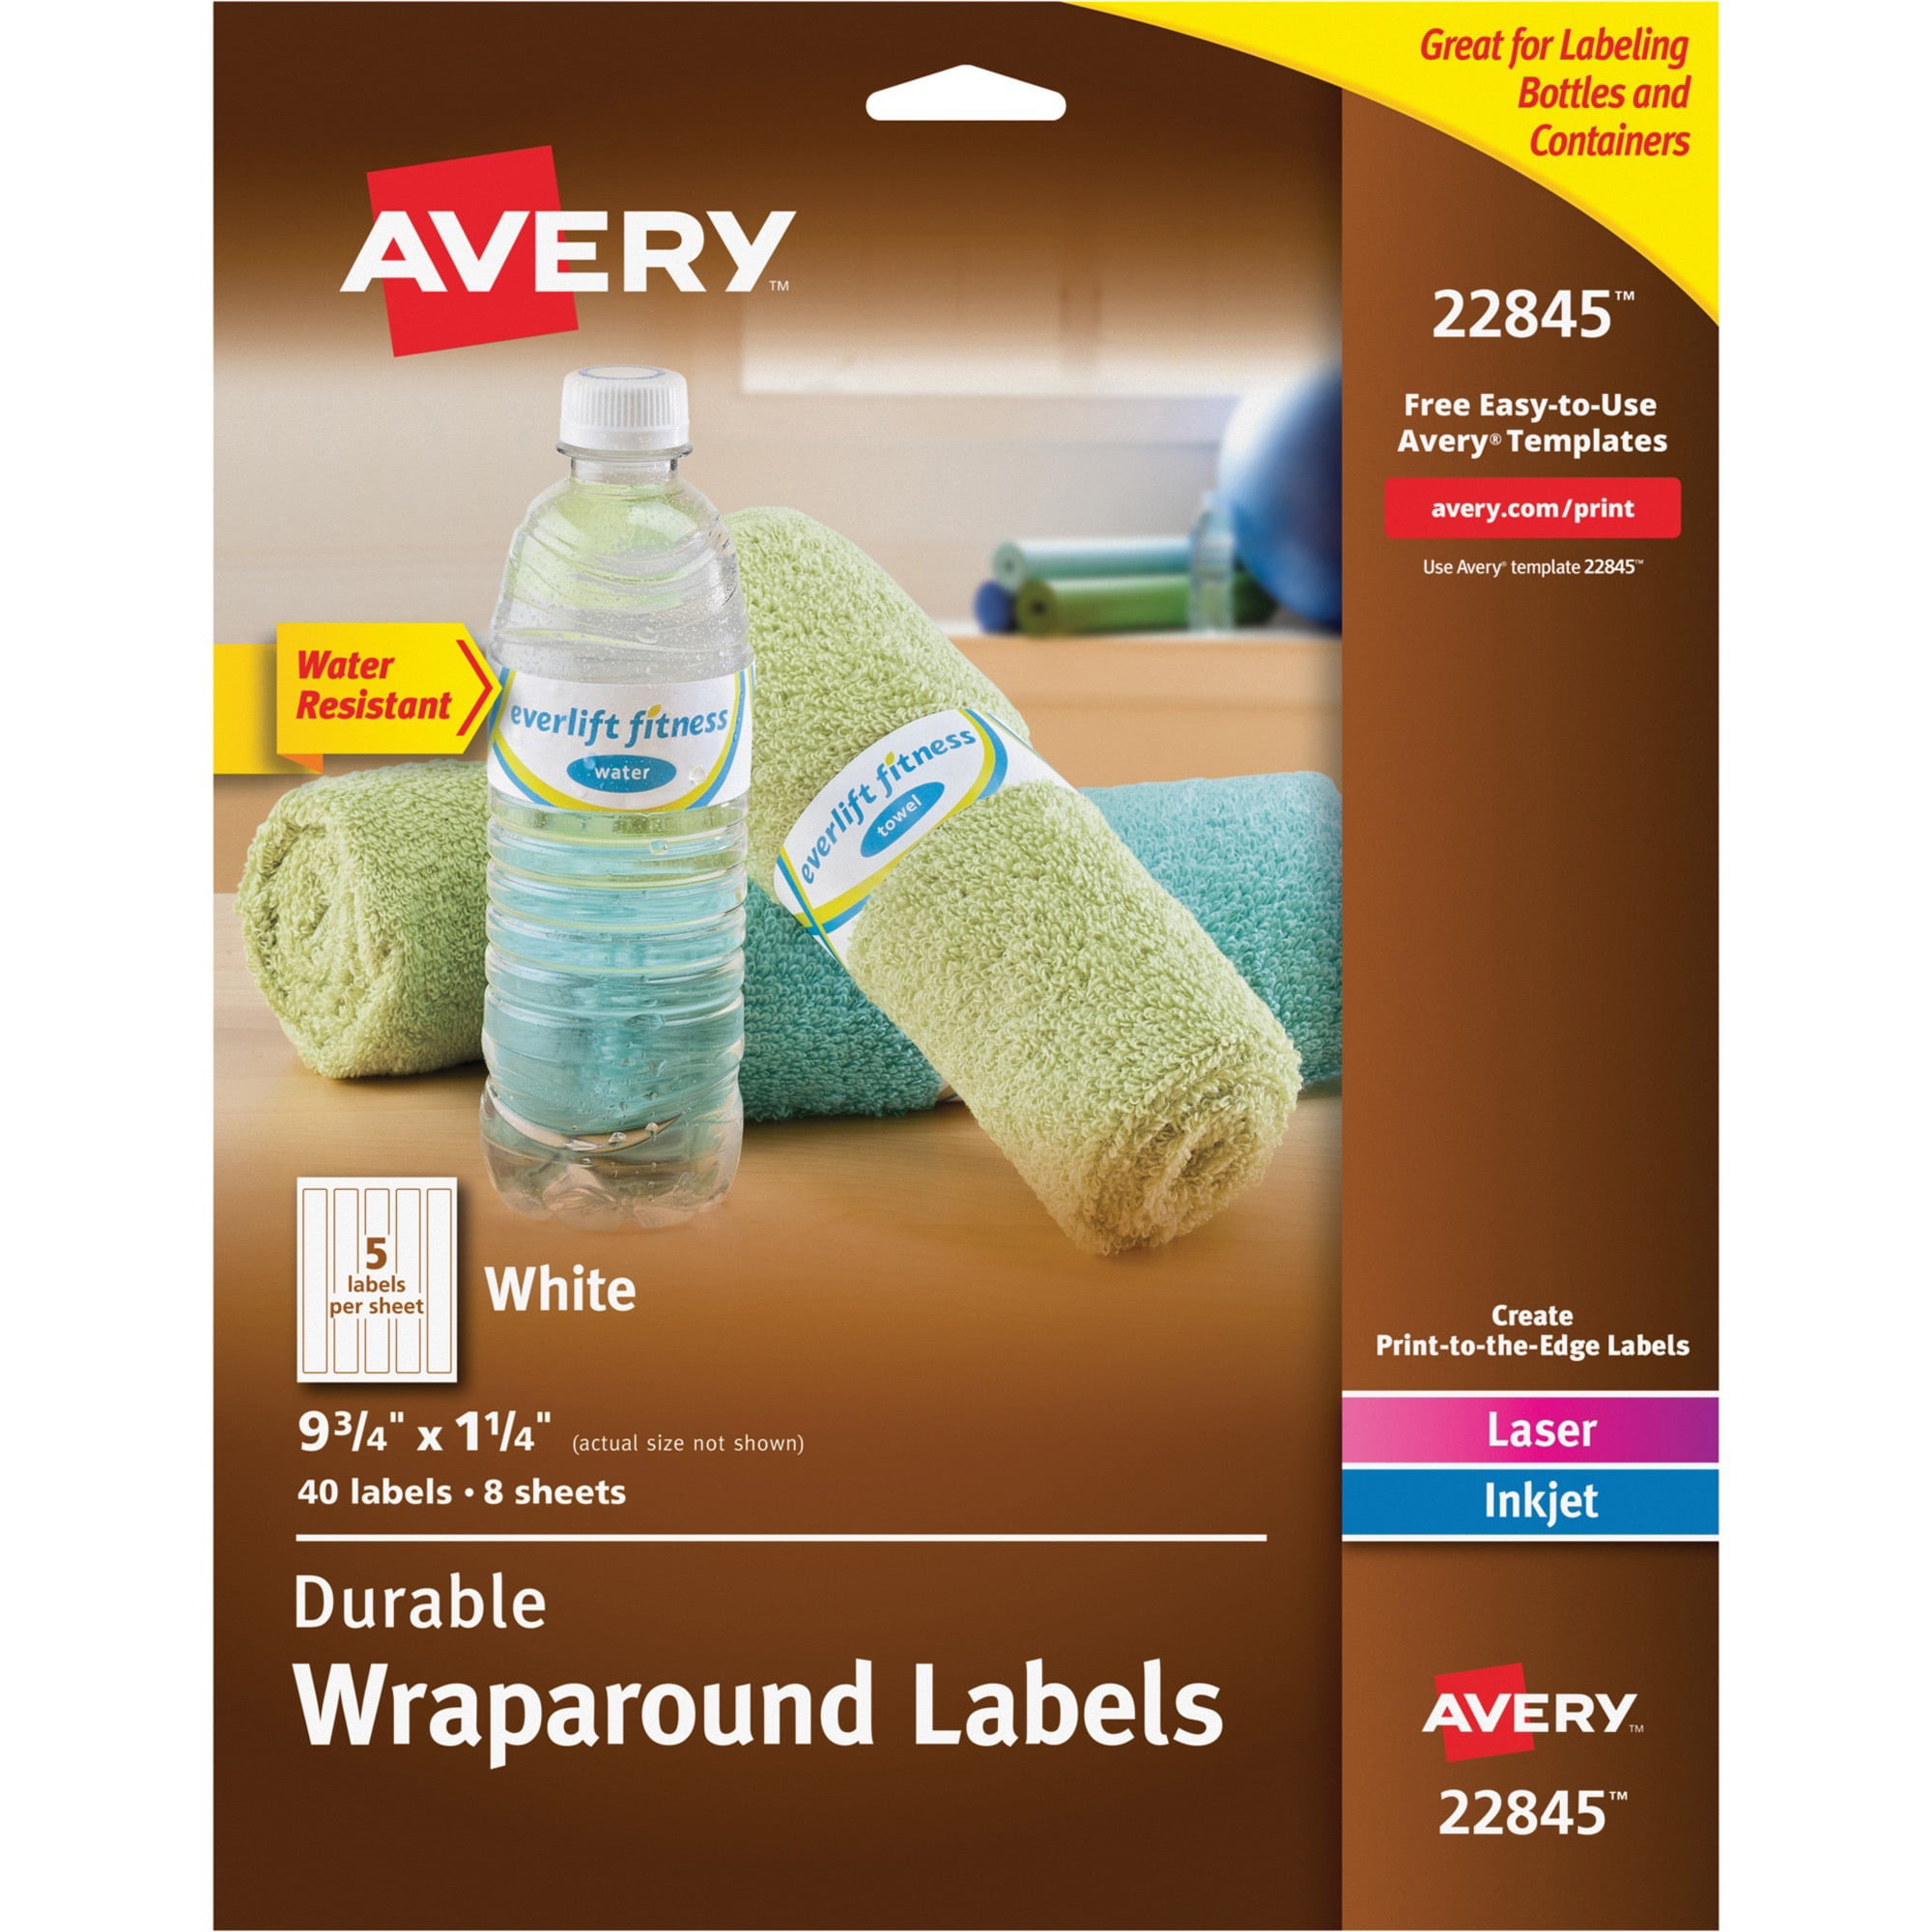 avery-r-durable-water-resistant-white-wraparound-labels-9-3-4-x-1-1-4